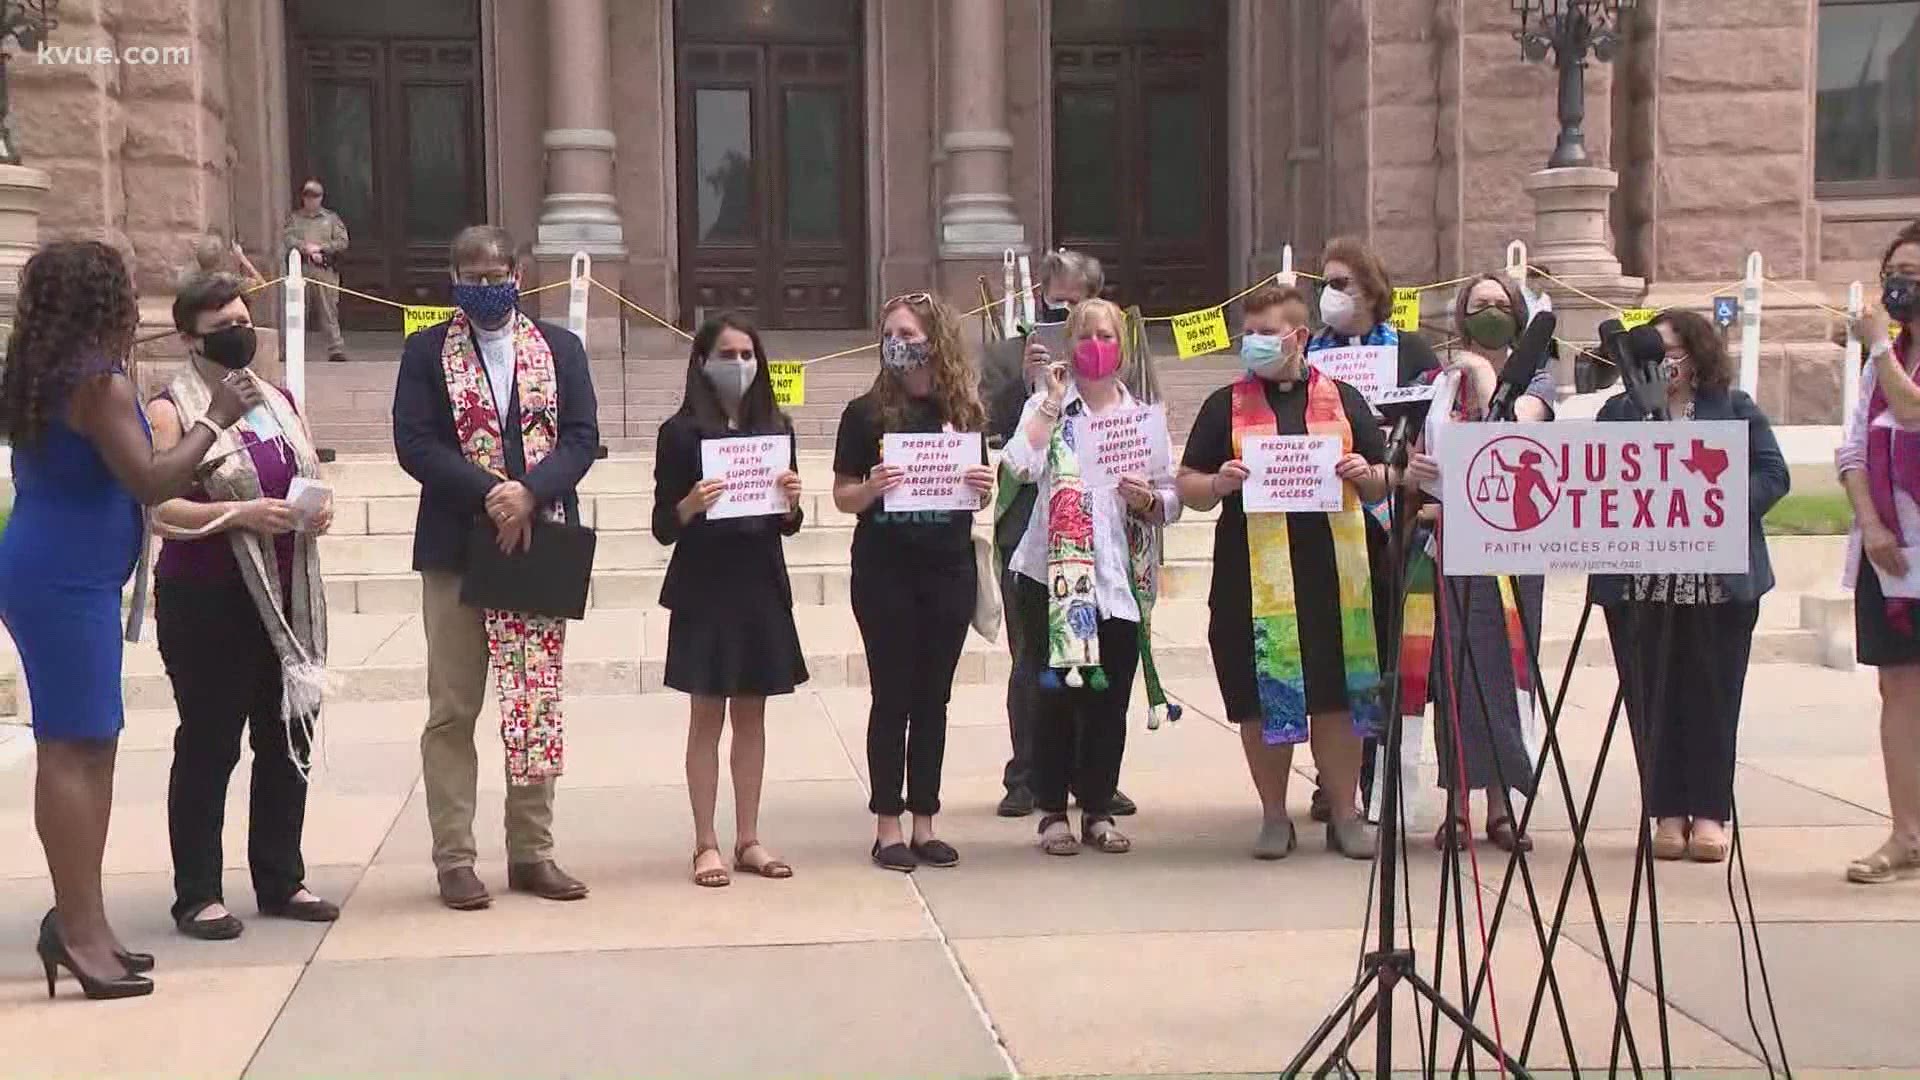 Faith leaders from across Texas met at the Capitol to urge lawmakers to vote against abortion restrictions.